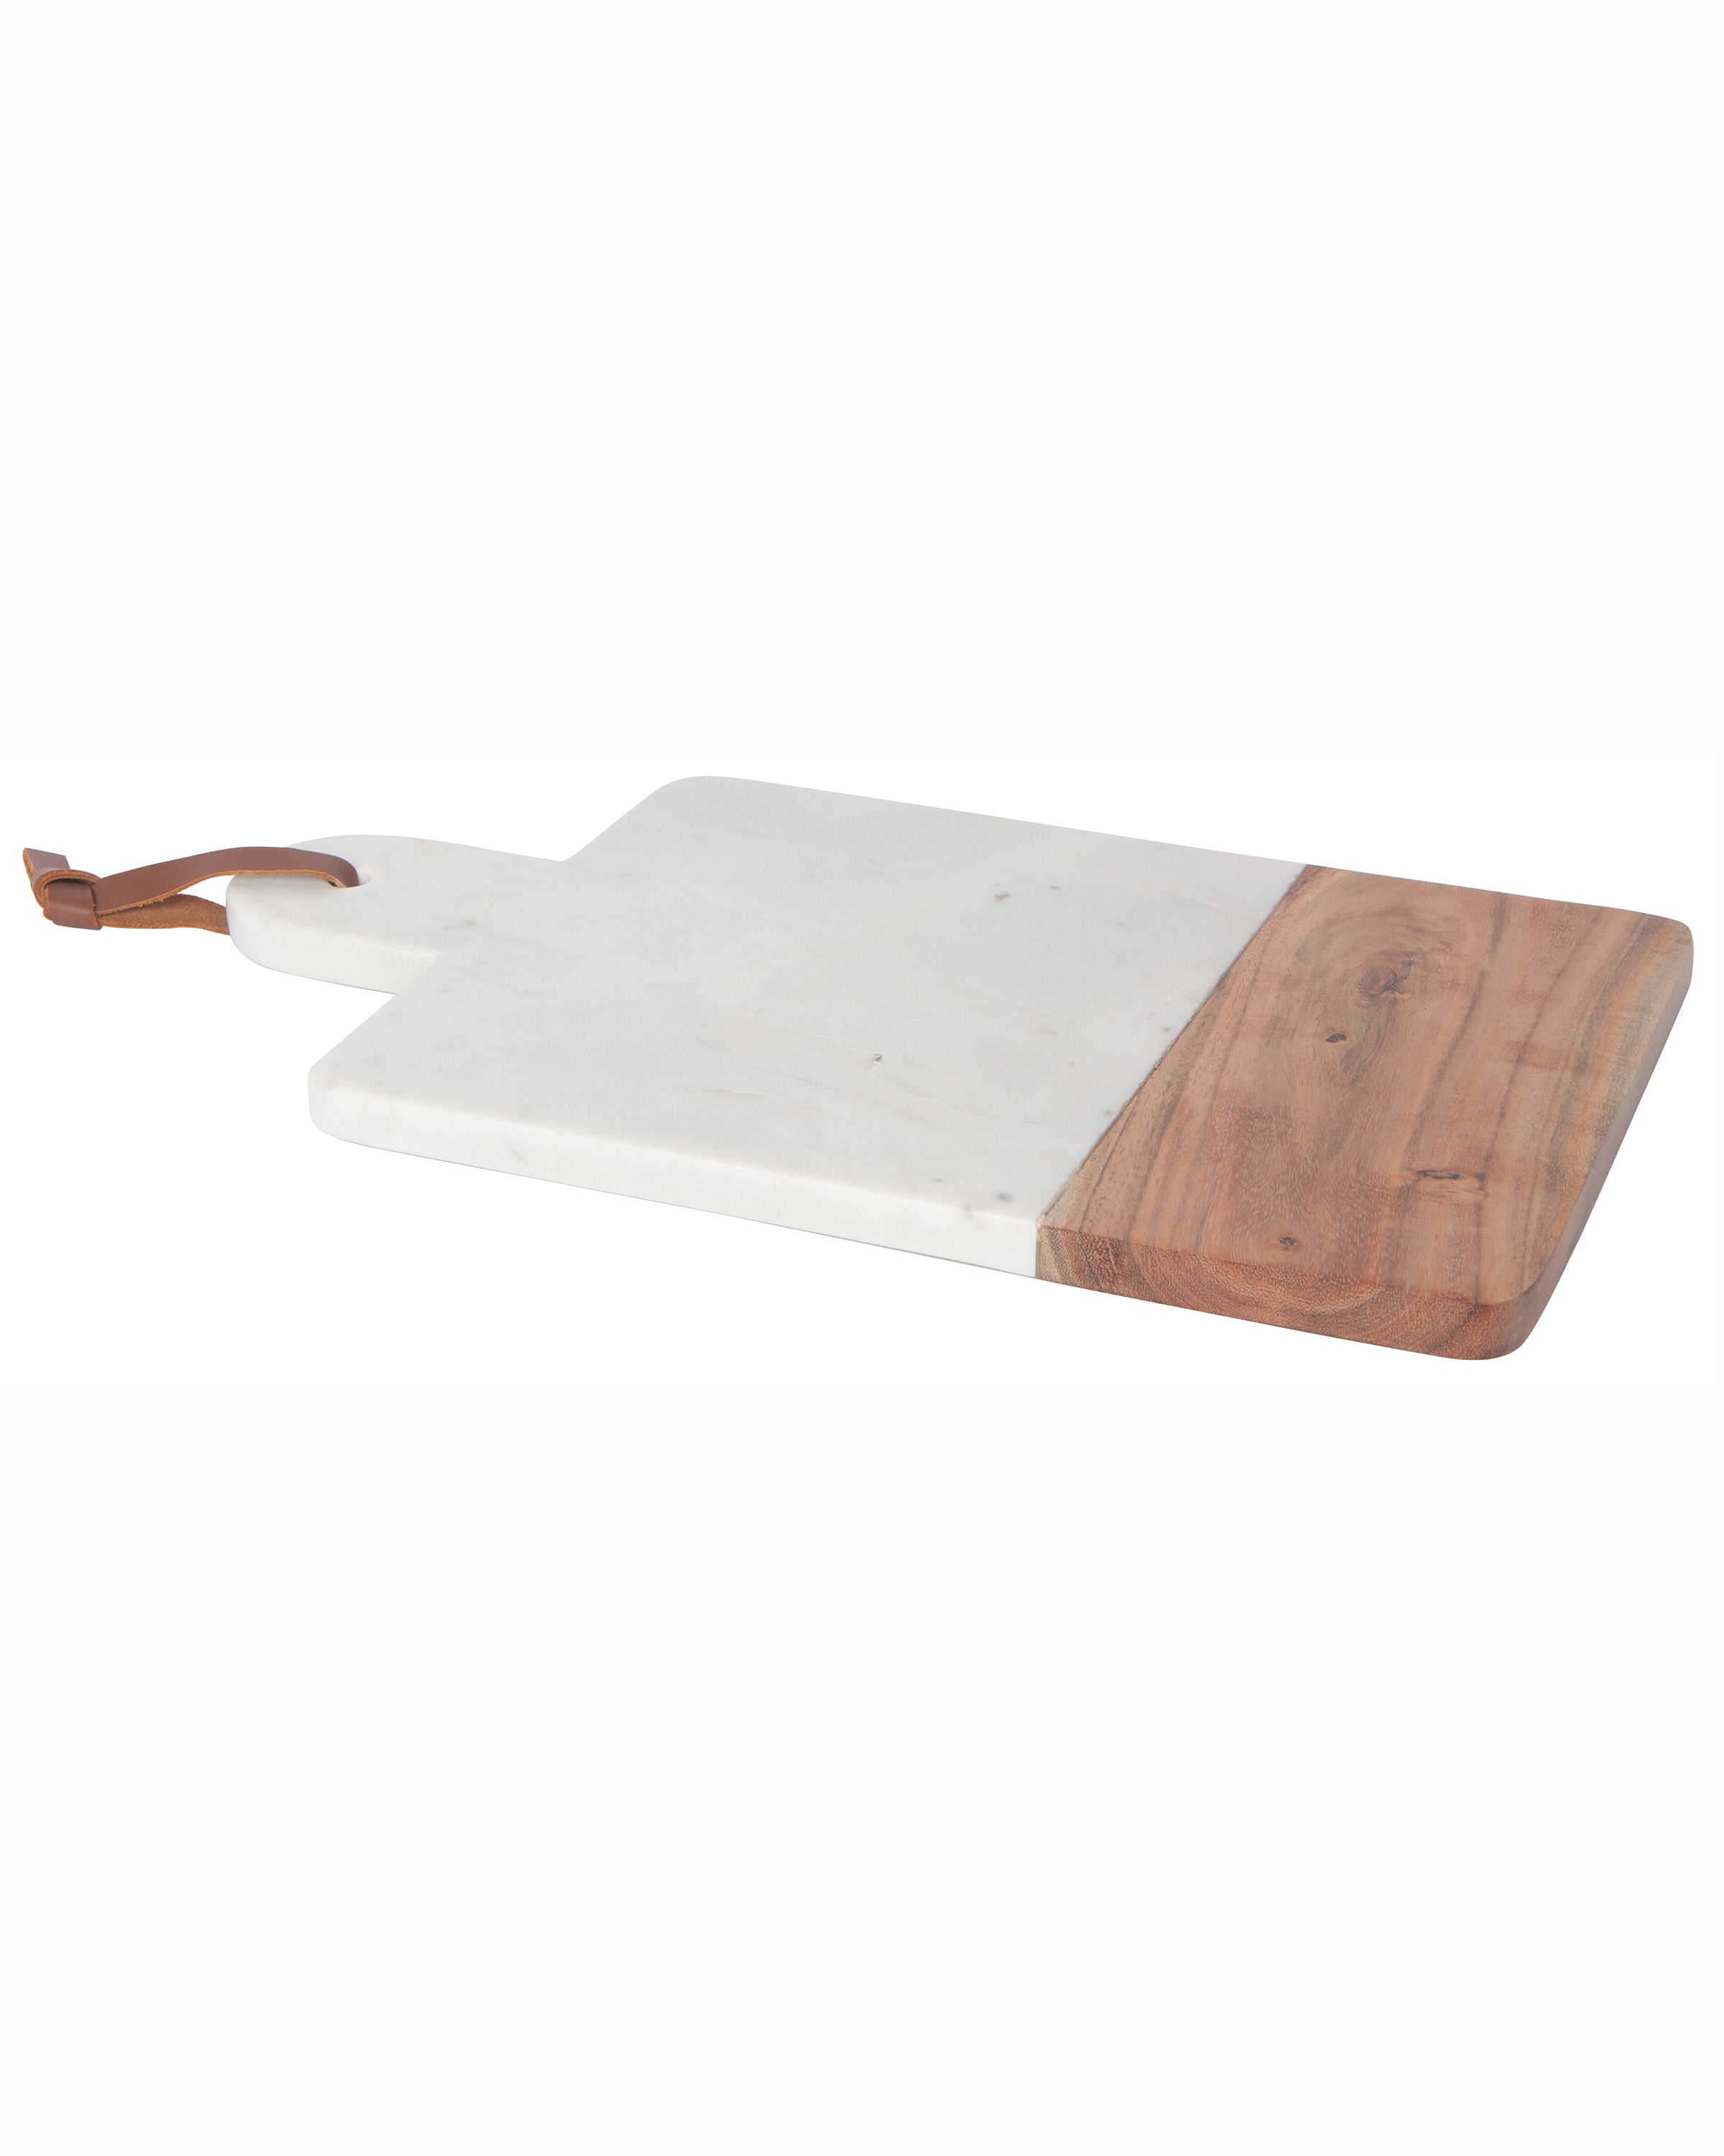 Danica Designs Serving Paddle in White Marble